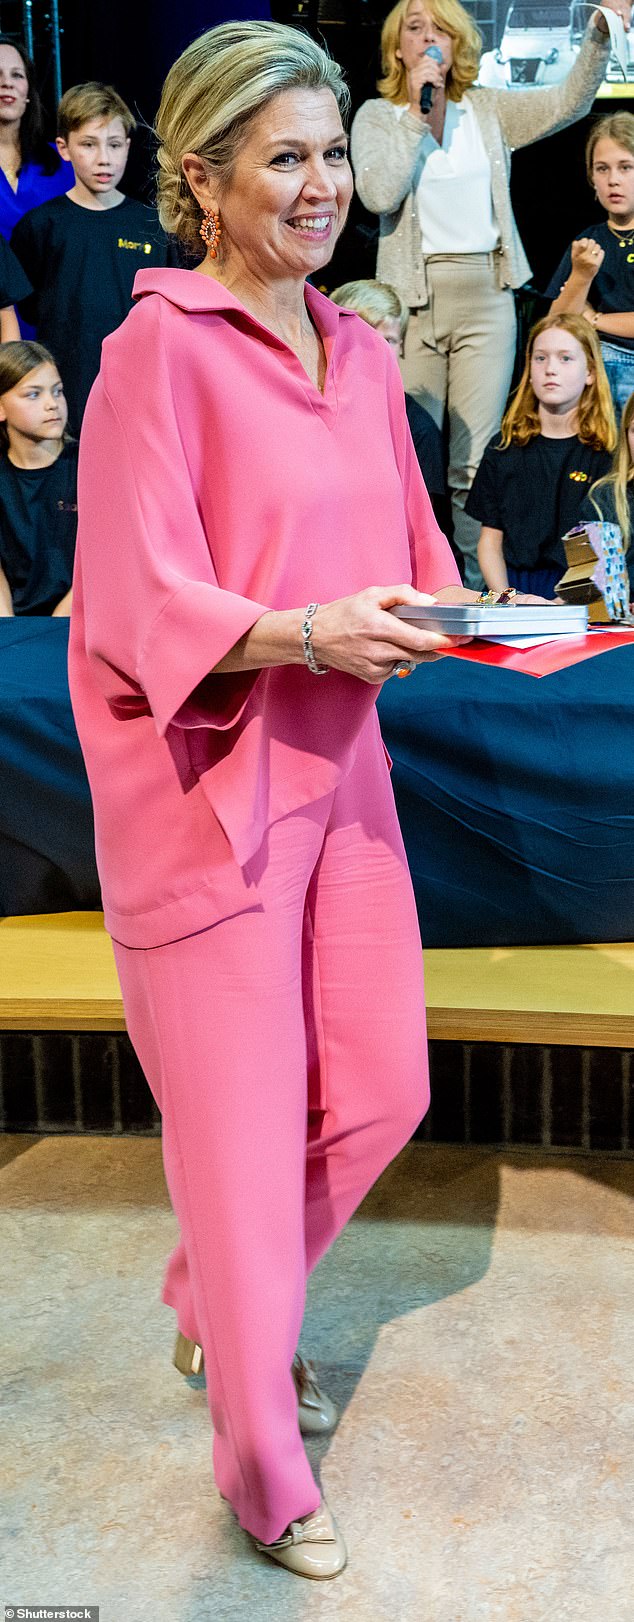 Confident: Queen Maxima of the Netherlands is described as 'confident and comfortable' in the pink ensembles she wears